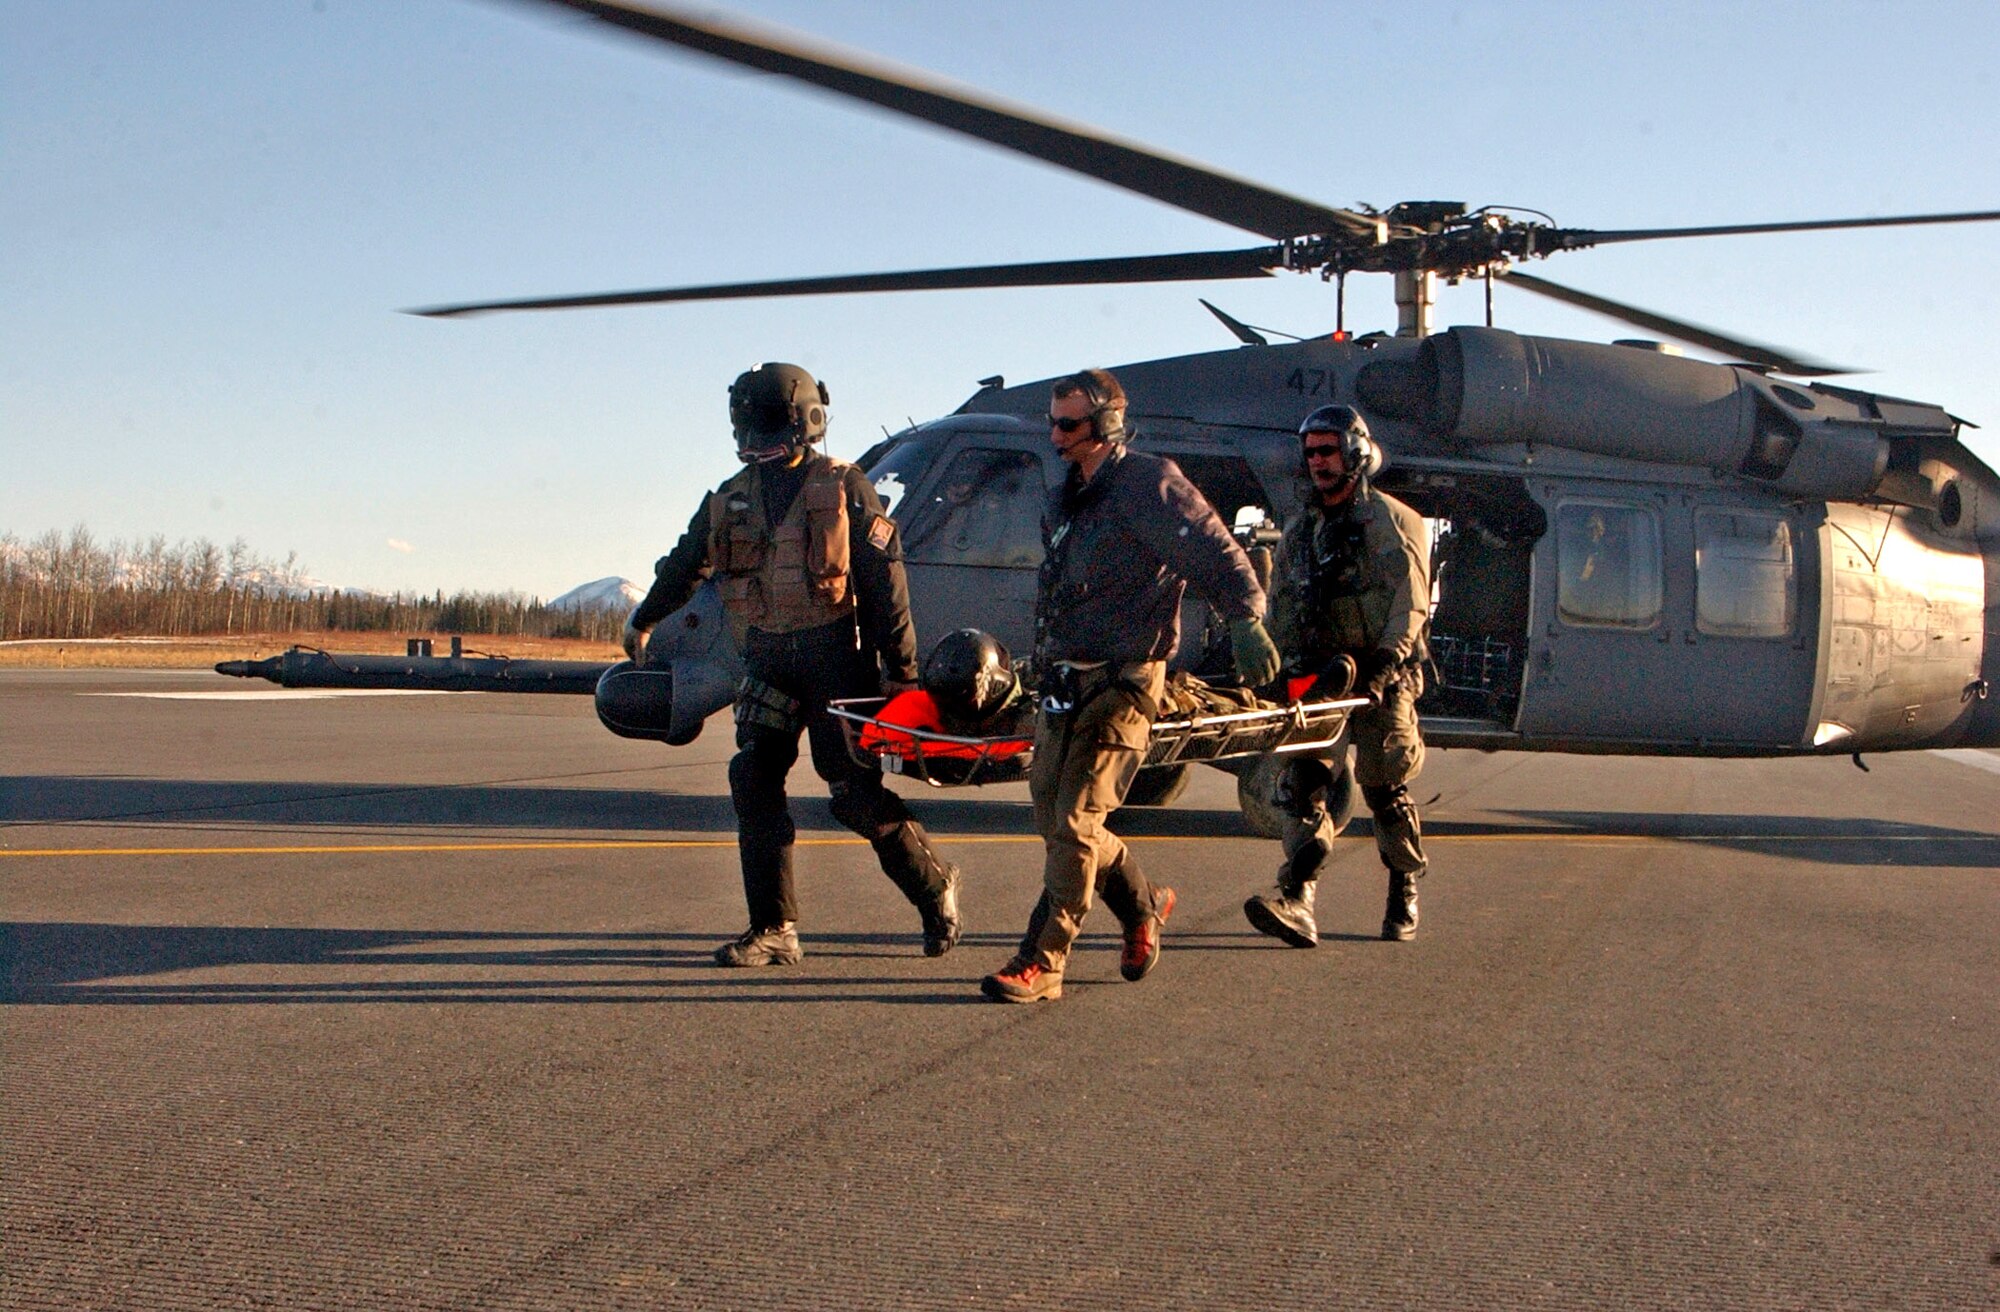 An aerial gunner and two pararescuemen off-load a simulated, injured aircrew member from a HH-60 Pave Hawk onto a HC-130 Hercules during a combat search and rescue training mission April 17 at Eielson Air Force Base, Alaska. Airmen from the 79th Rescue Squadron at Davis-Monthan Air Force Base, Ariz., are operating the HC-130 during a combat search and rescue mission at Red Flag-Alaska 07-1. (U.S. Air Force photo\Senior Airman Justin Weaver)